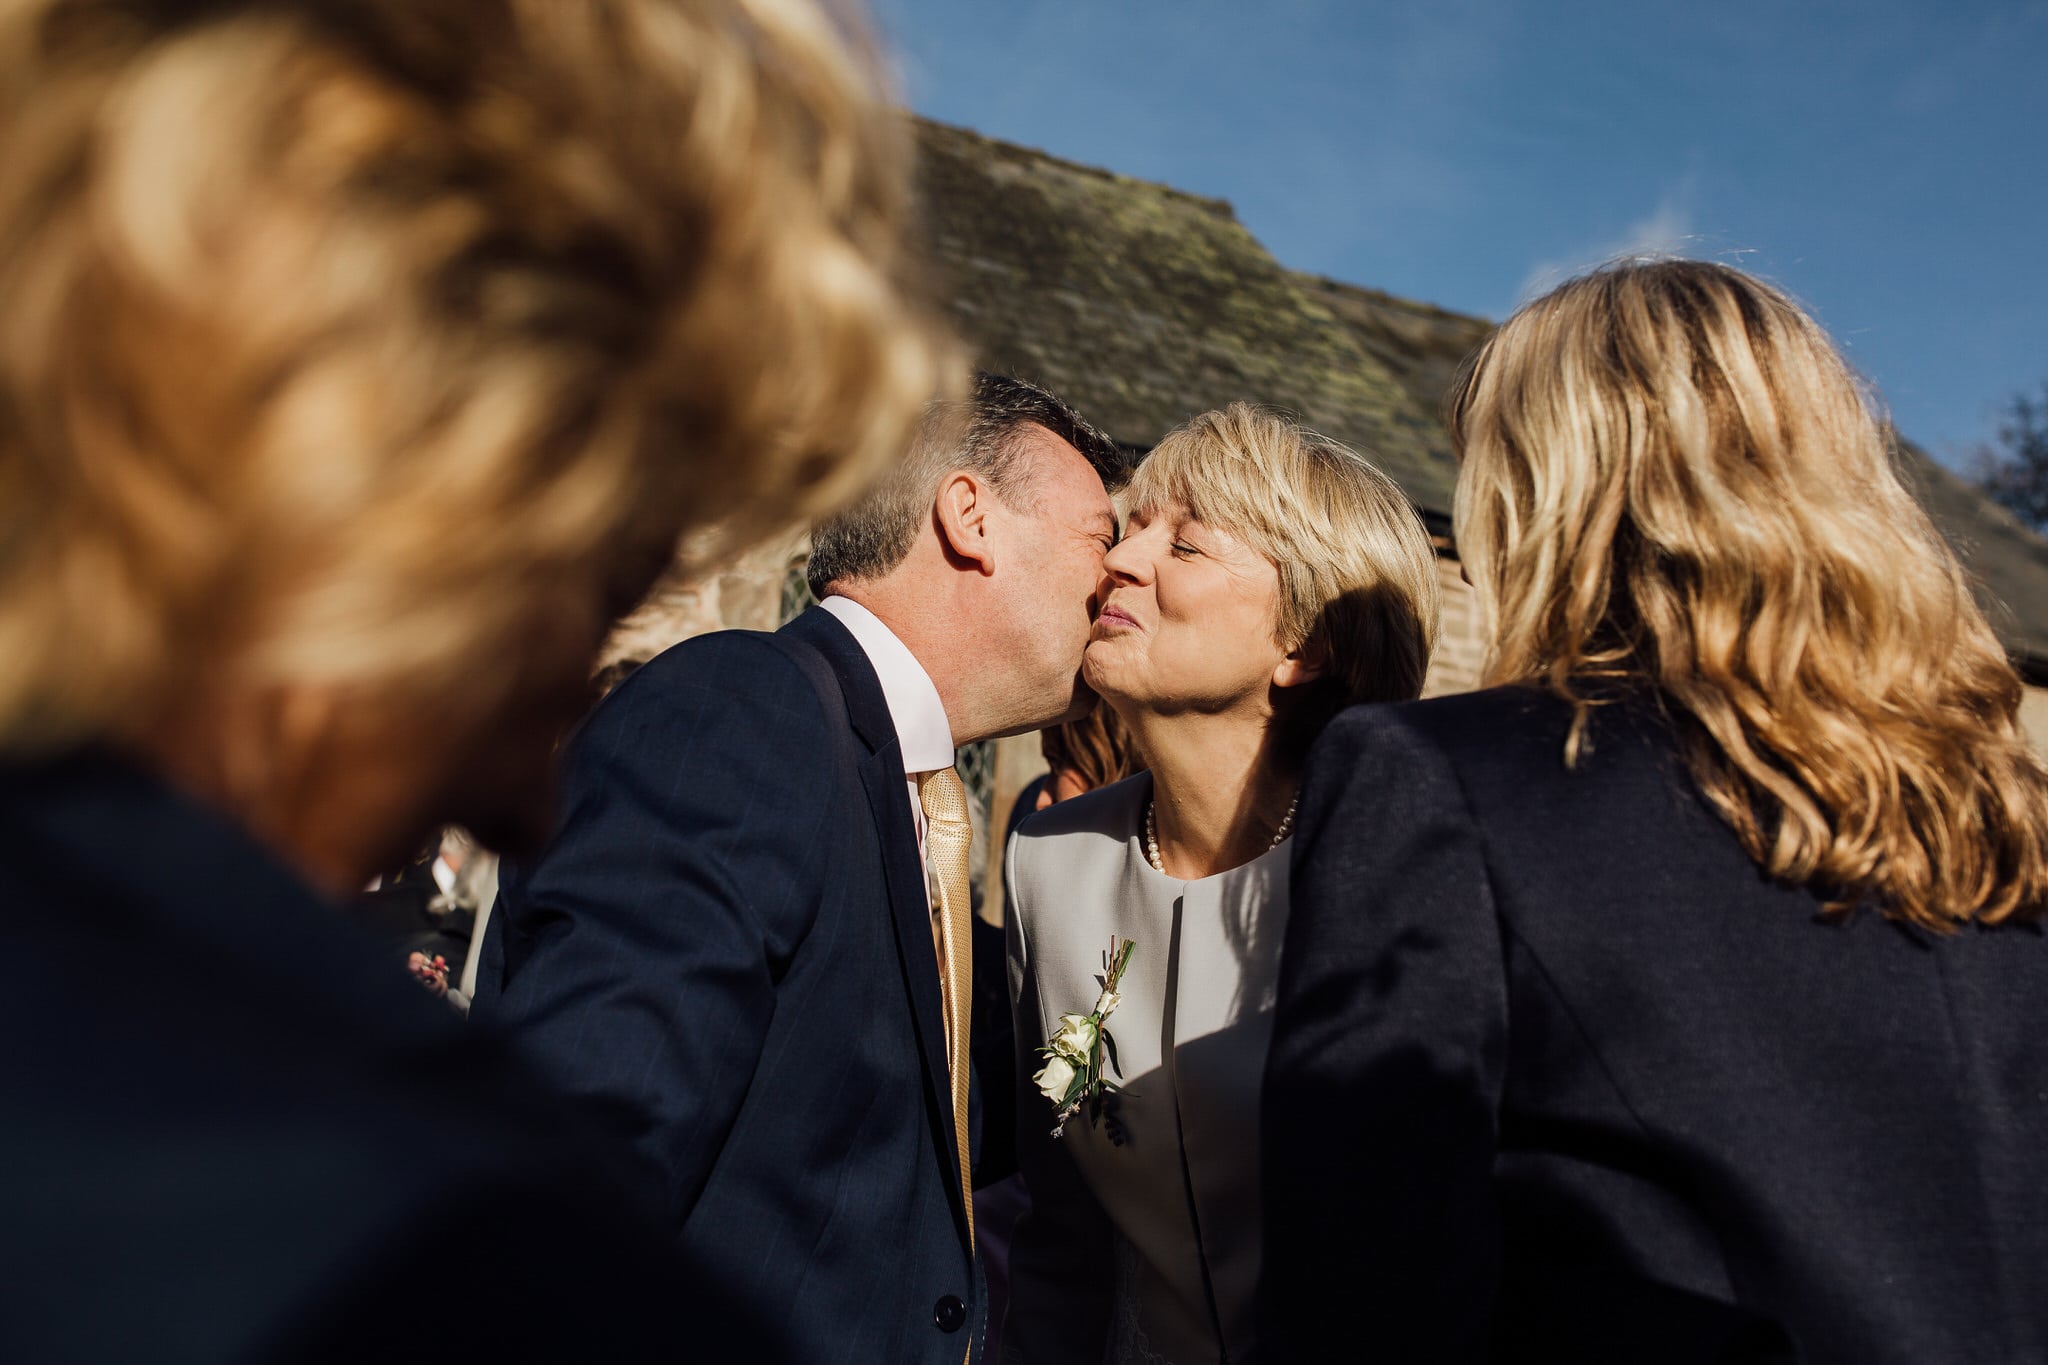 mother of the bride kissing friend